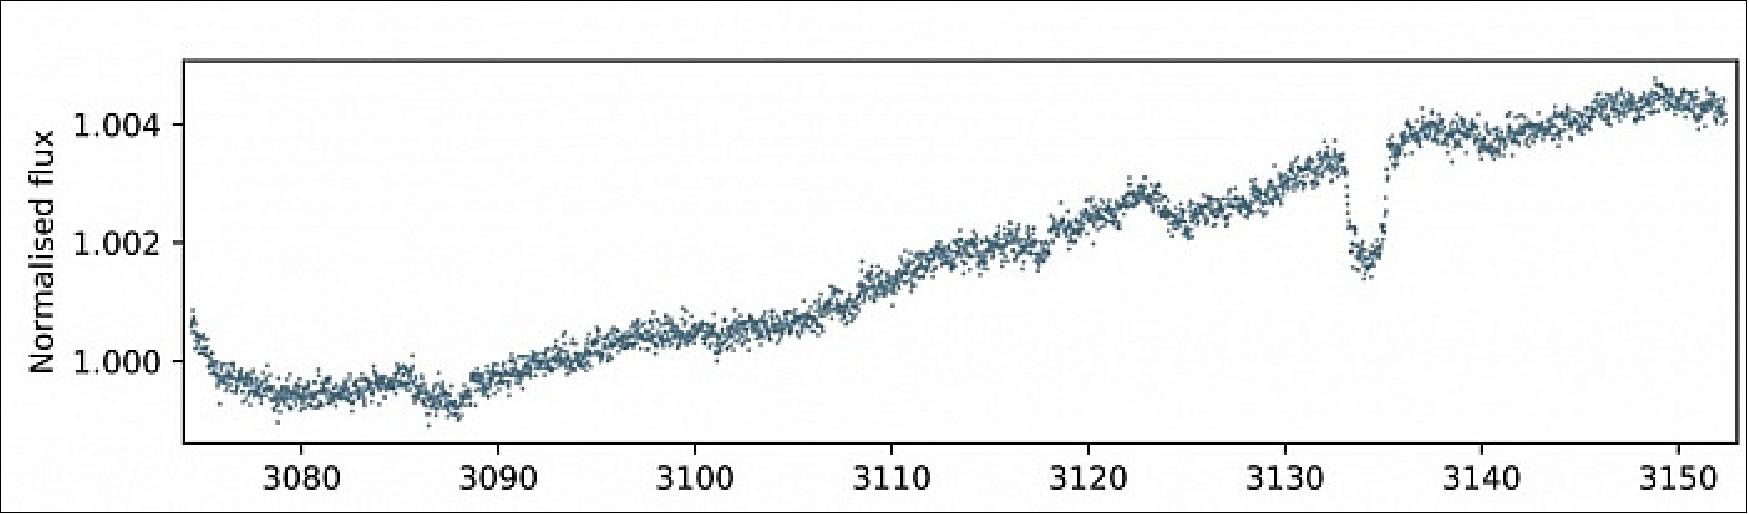 Figure 31: Data from the light curve of the EPIC248847494 star. The transit is clearly visible, on the upper right part of the image (image credit: UNIGE)